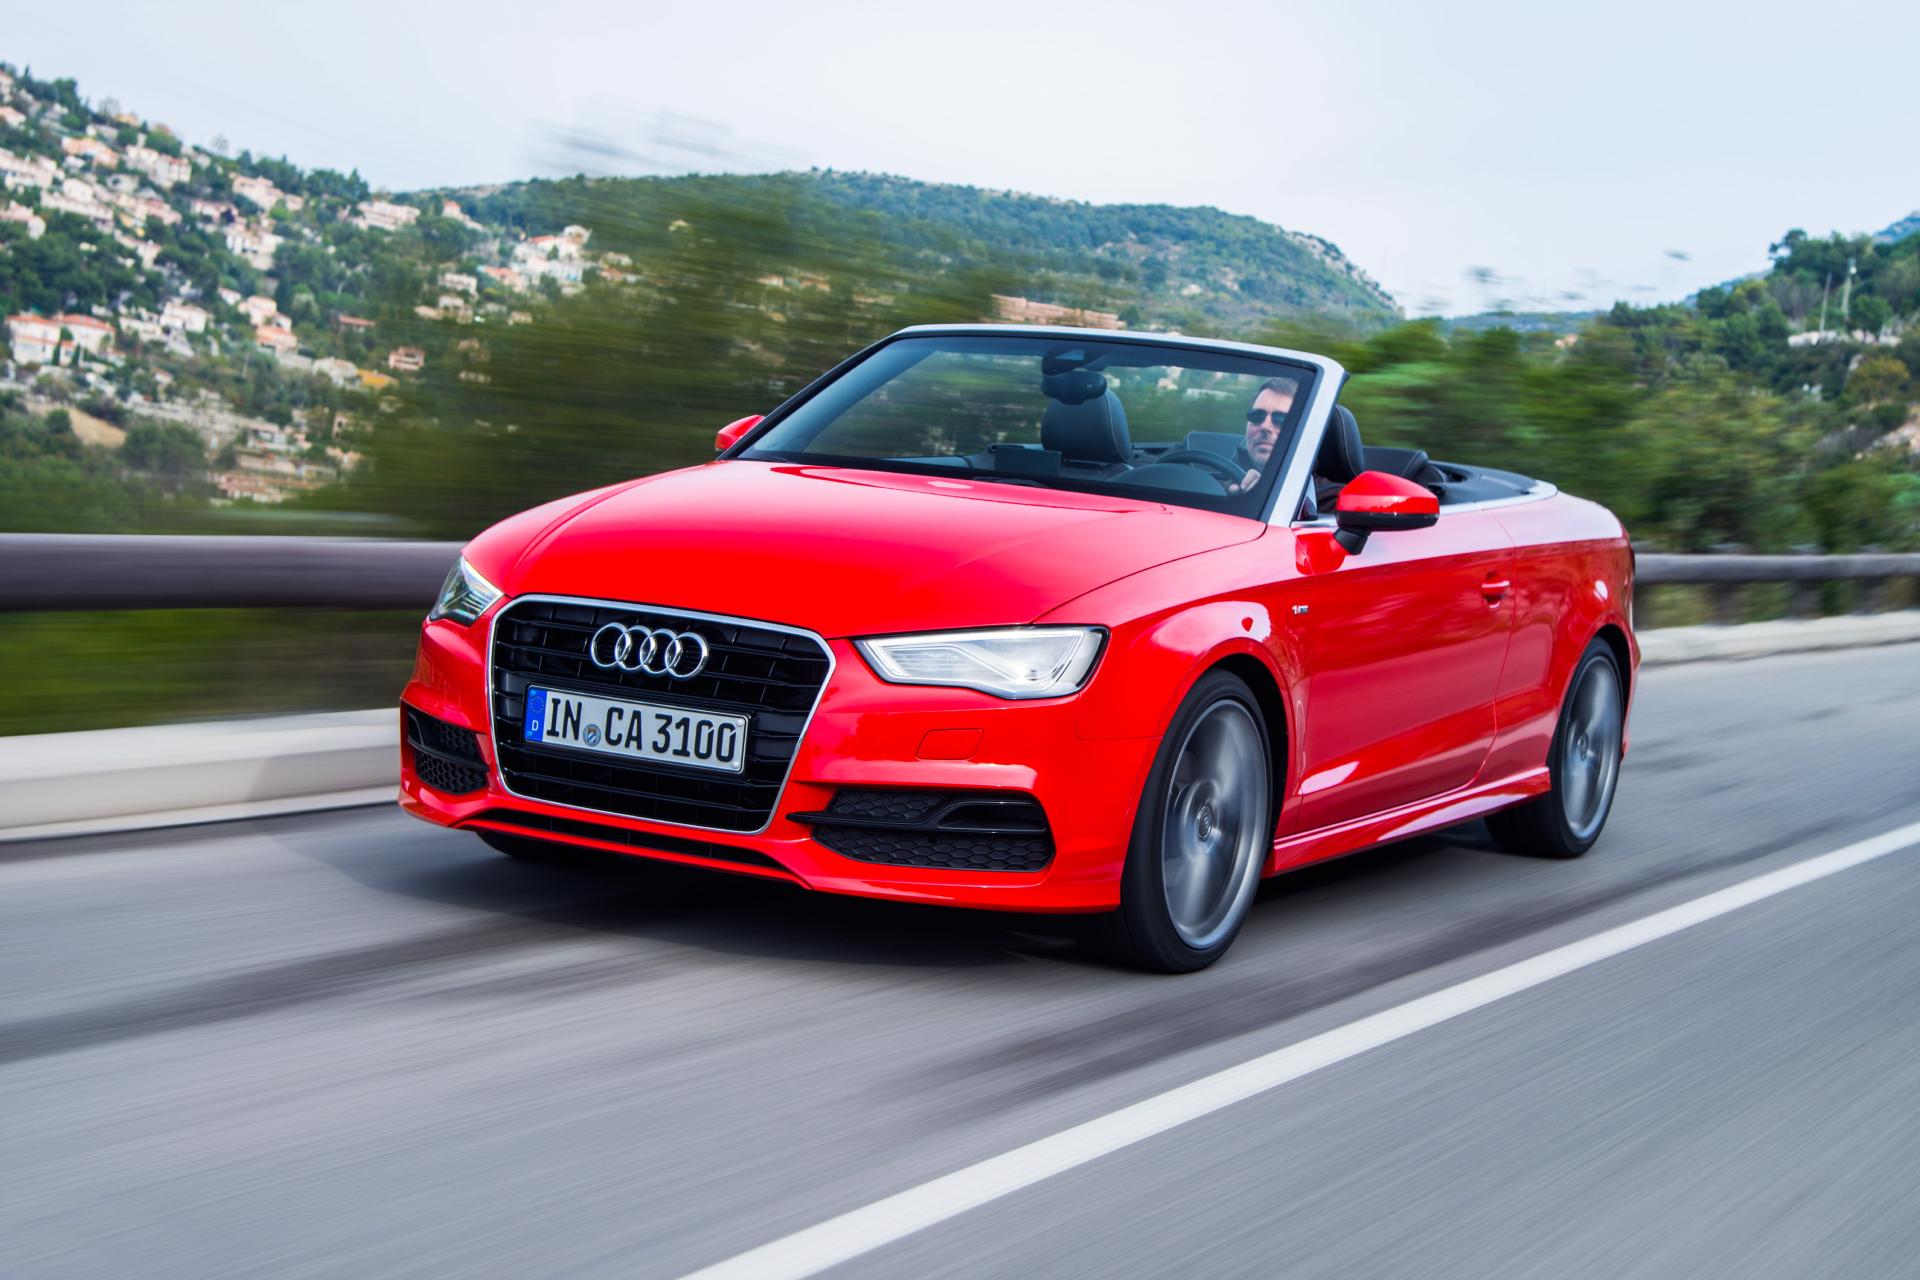 2015 Audi A3 Cabriolet Pictures And Wallpaper - Audi A4 Cabrio 2015 - HD Wallpaper 